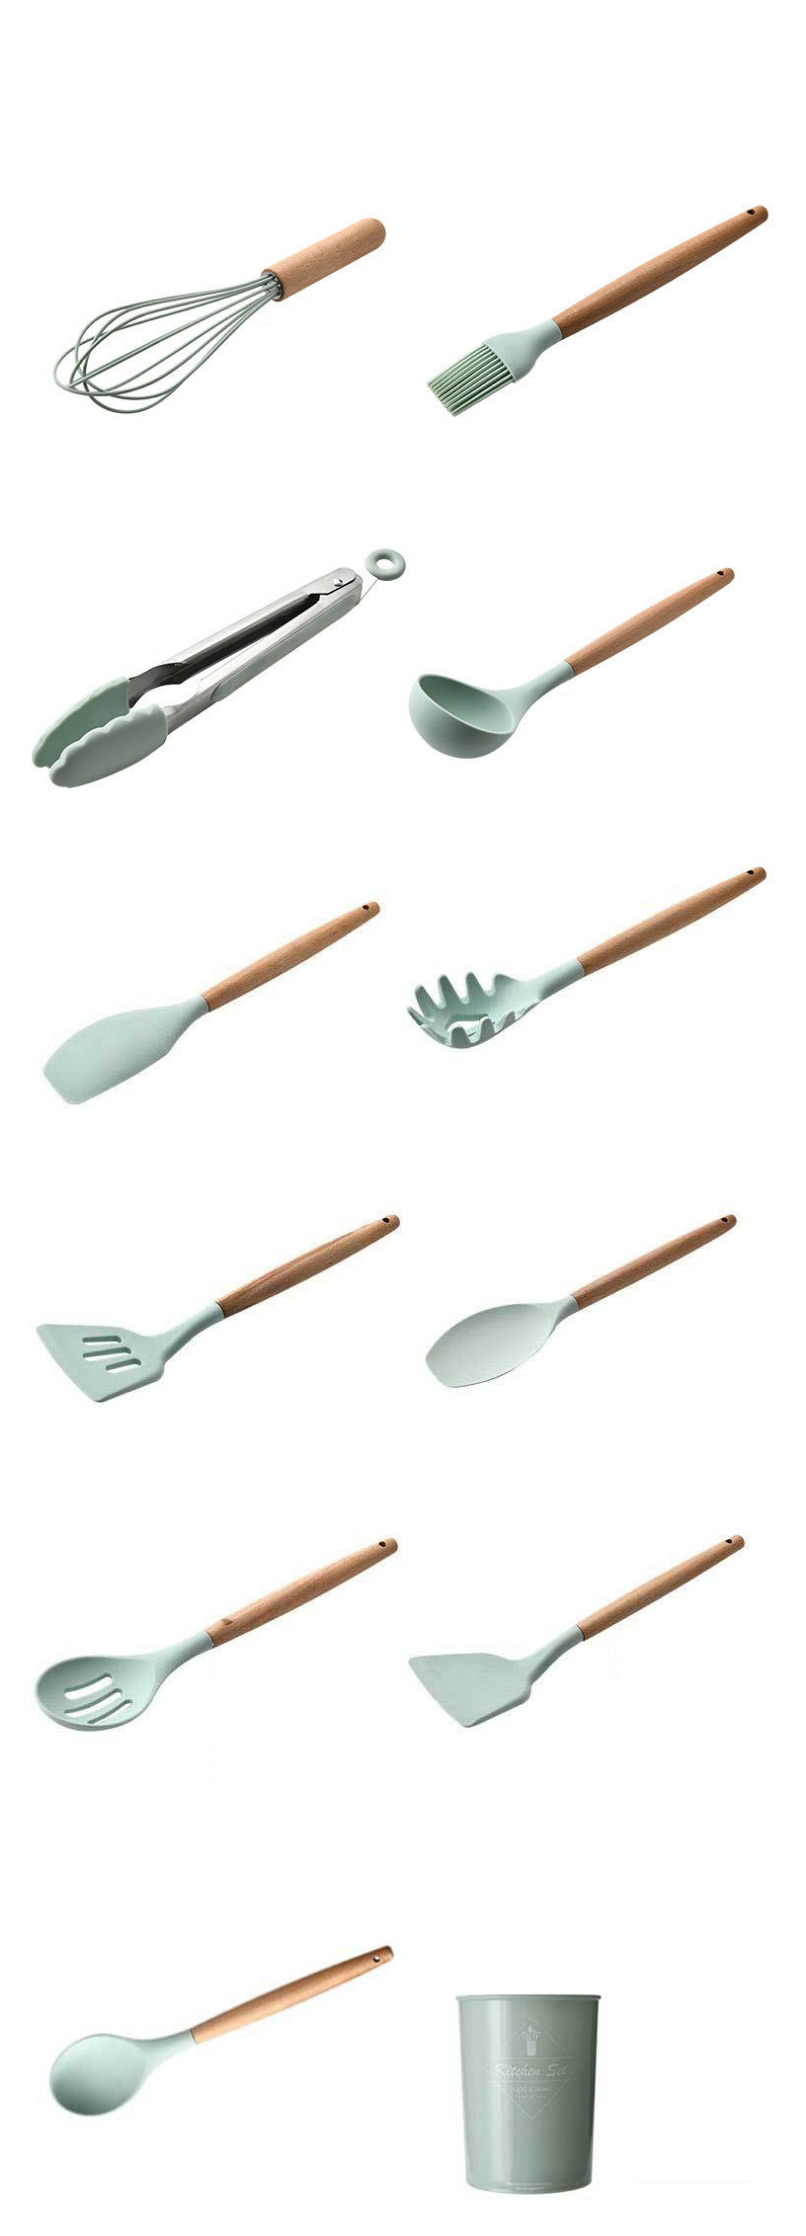 Fashion The 11 Piece Does Not Contain The Bucket Storage Of Barrels Wooden Handle Silicone Non Stick Turner Kitchenware Sets,Kitchen